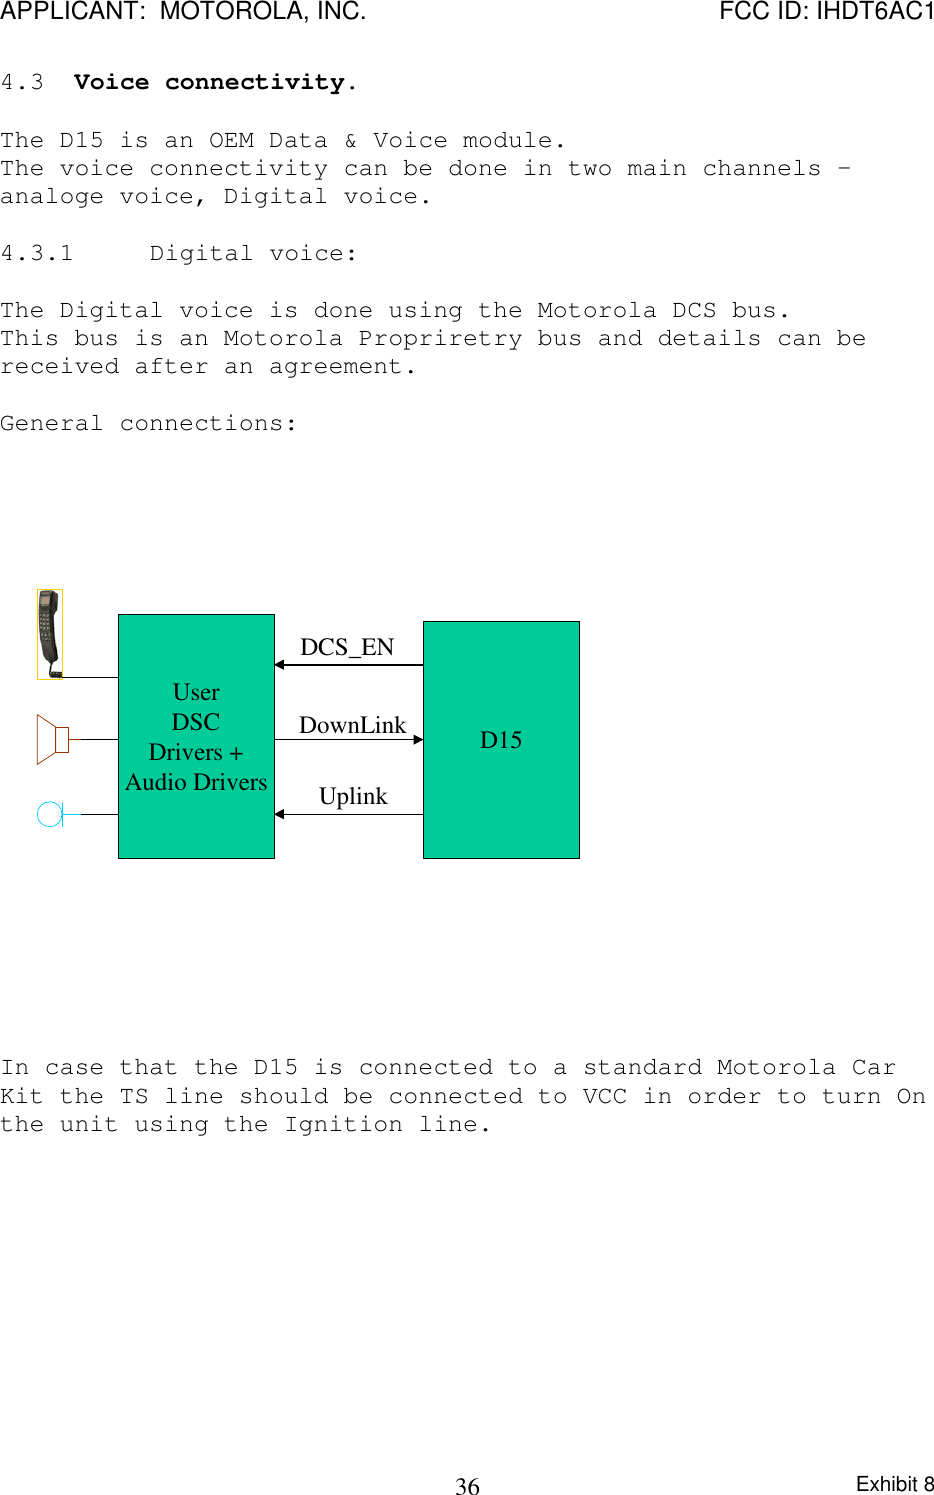 APPLICANT:  MOTOROLA, INC. FCC ID: IHDT6AC1Exhibit 8364.3 Voice connectivity.The D15 is an OEM Data &amp; Voice module.The voice connectivity can be done in two main channels –analoge voice, Digital voice.4.3.1 Digital voice:The Digital voice is done using the Motorola DCS bus.This bus is an Motorola Propriretry bus and details can bereceived after an agreement.General connections:UserDSCDrivers +Audio DriversD15DCS_ENDownLinkUplinkIn case that the D15 is connected to a standard Motorola CarKit the TS line should be connected to VCC in order to turn Onthe unit using the Ignition line.